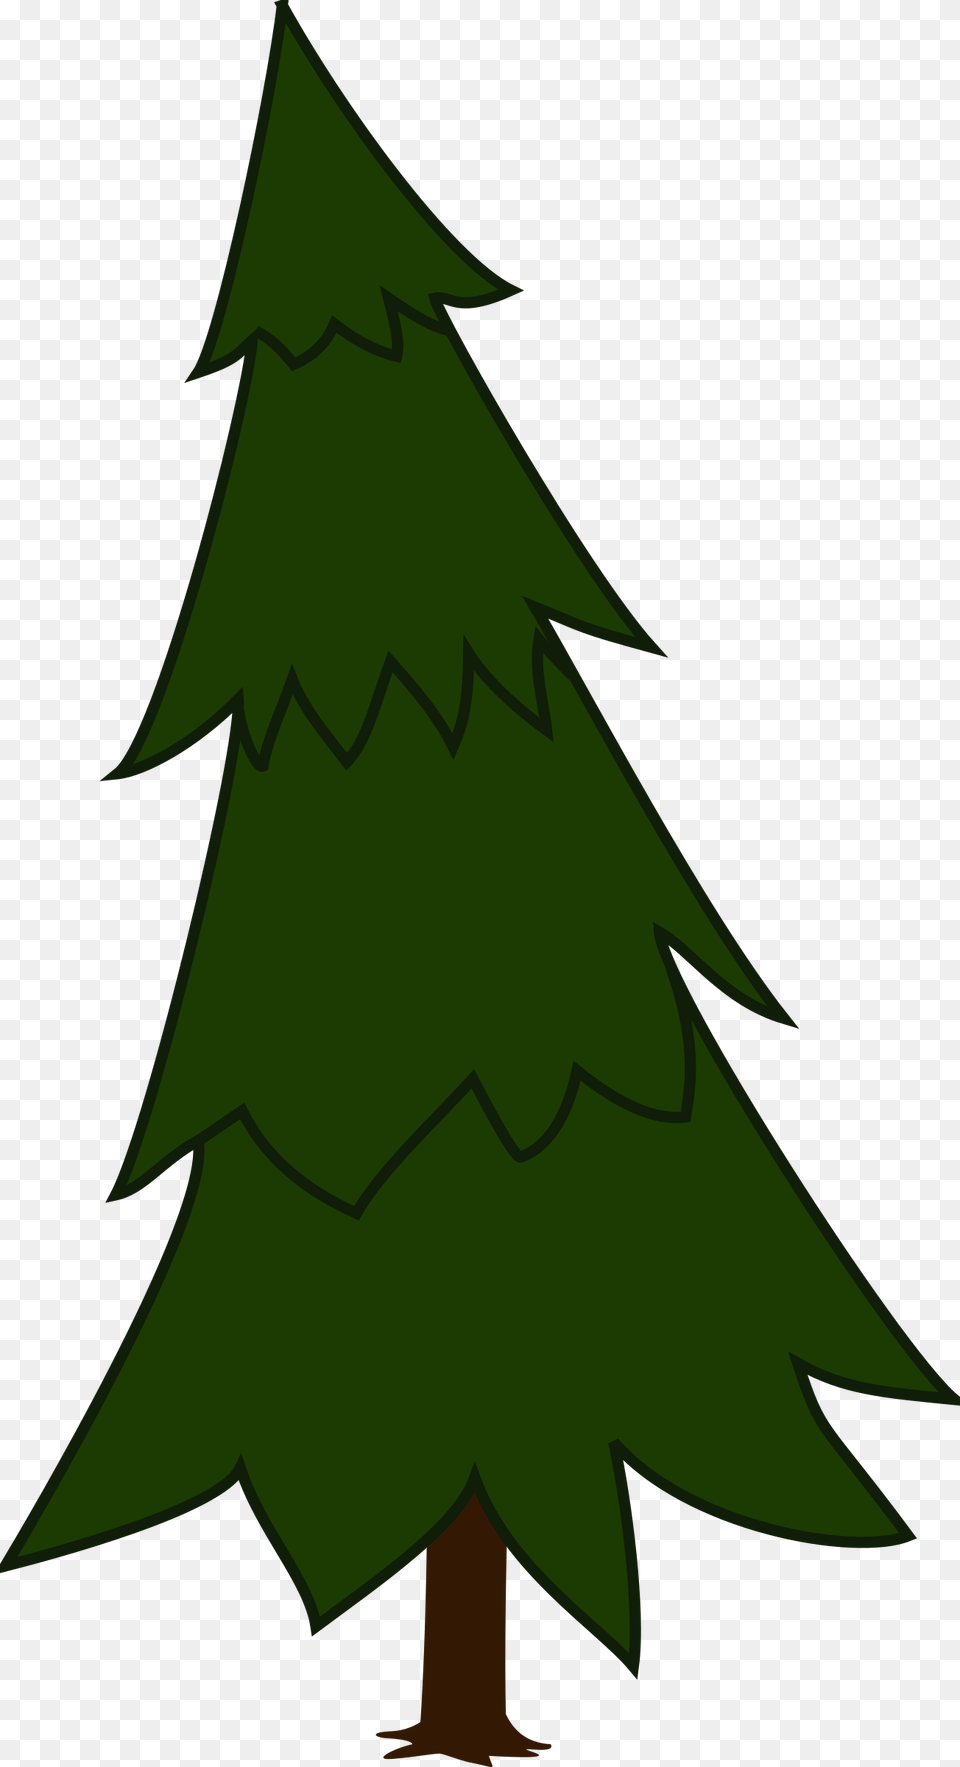 Spruce Tree Silhouette Pine Tree Animated, Green, Plant, Fir, Christmas Png Image